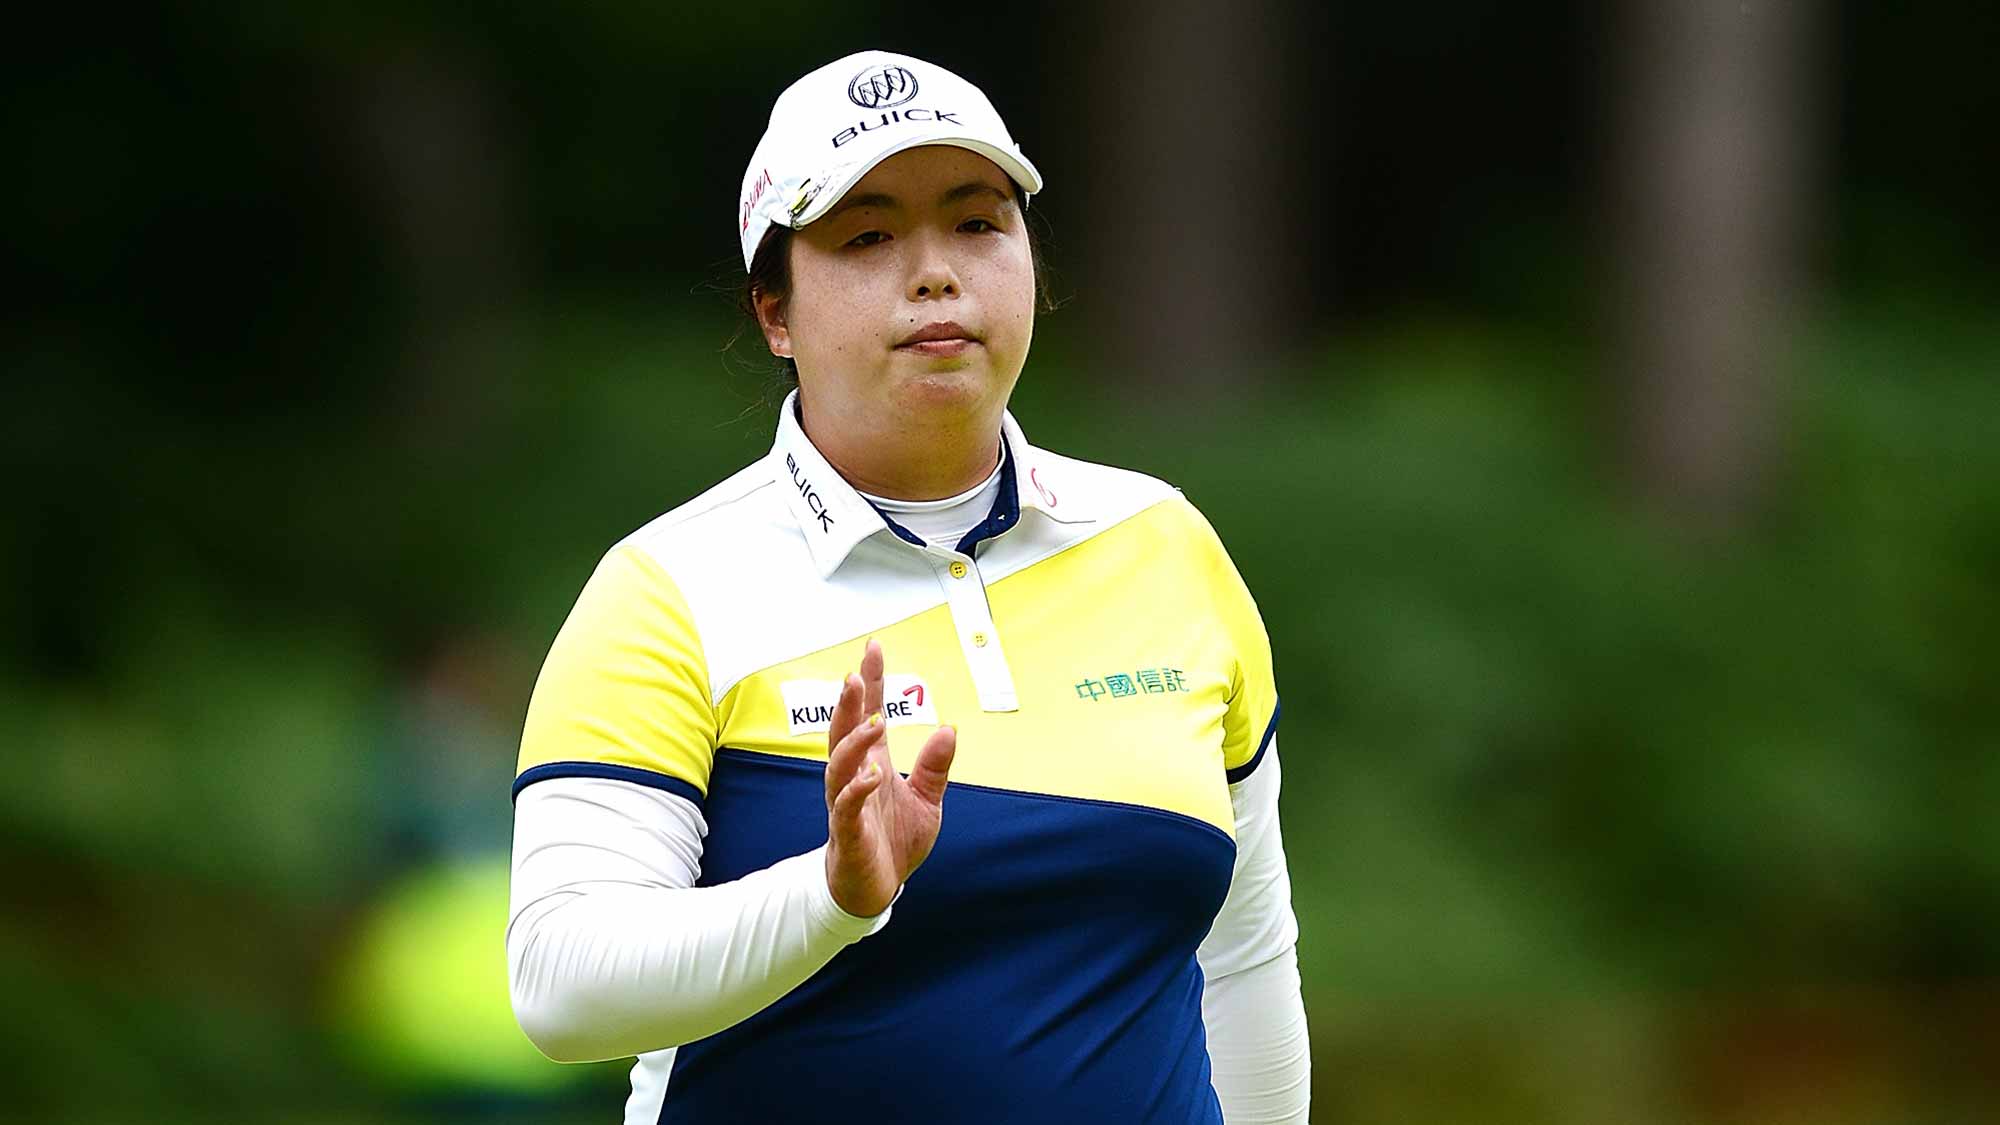 Shanshan Feng of China acknowledges the crowd on the 2nd green during the third round of the Ricoh Women's British Open at Woburn Golf Club